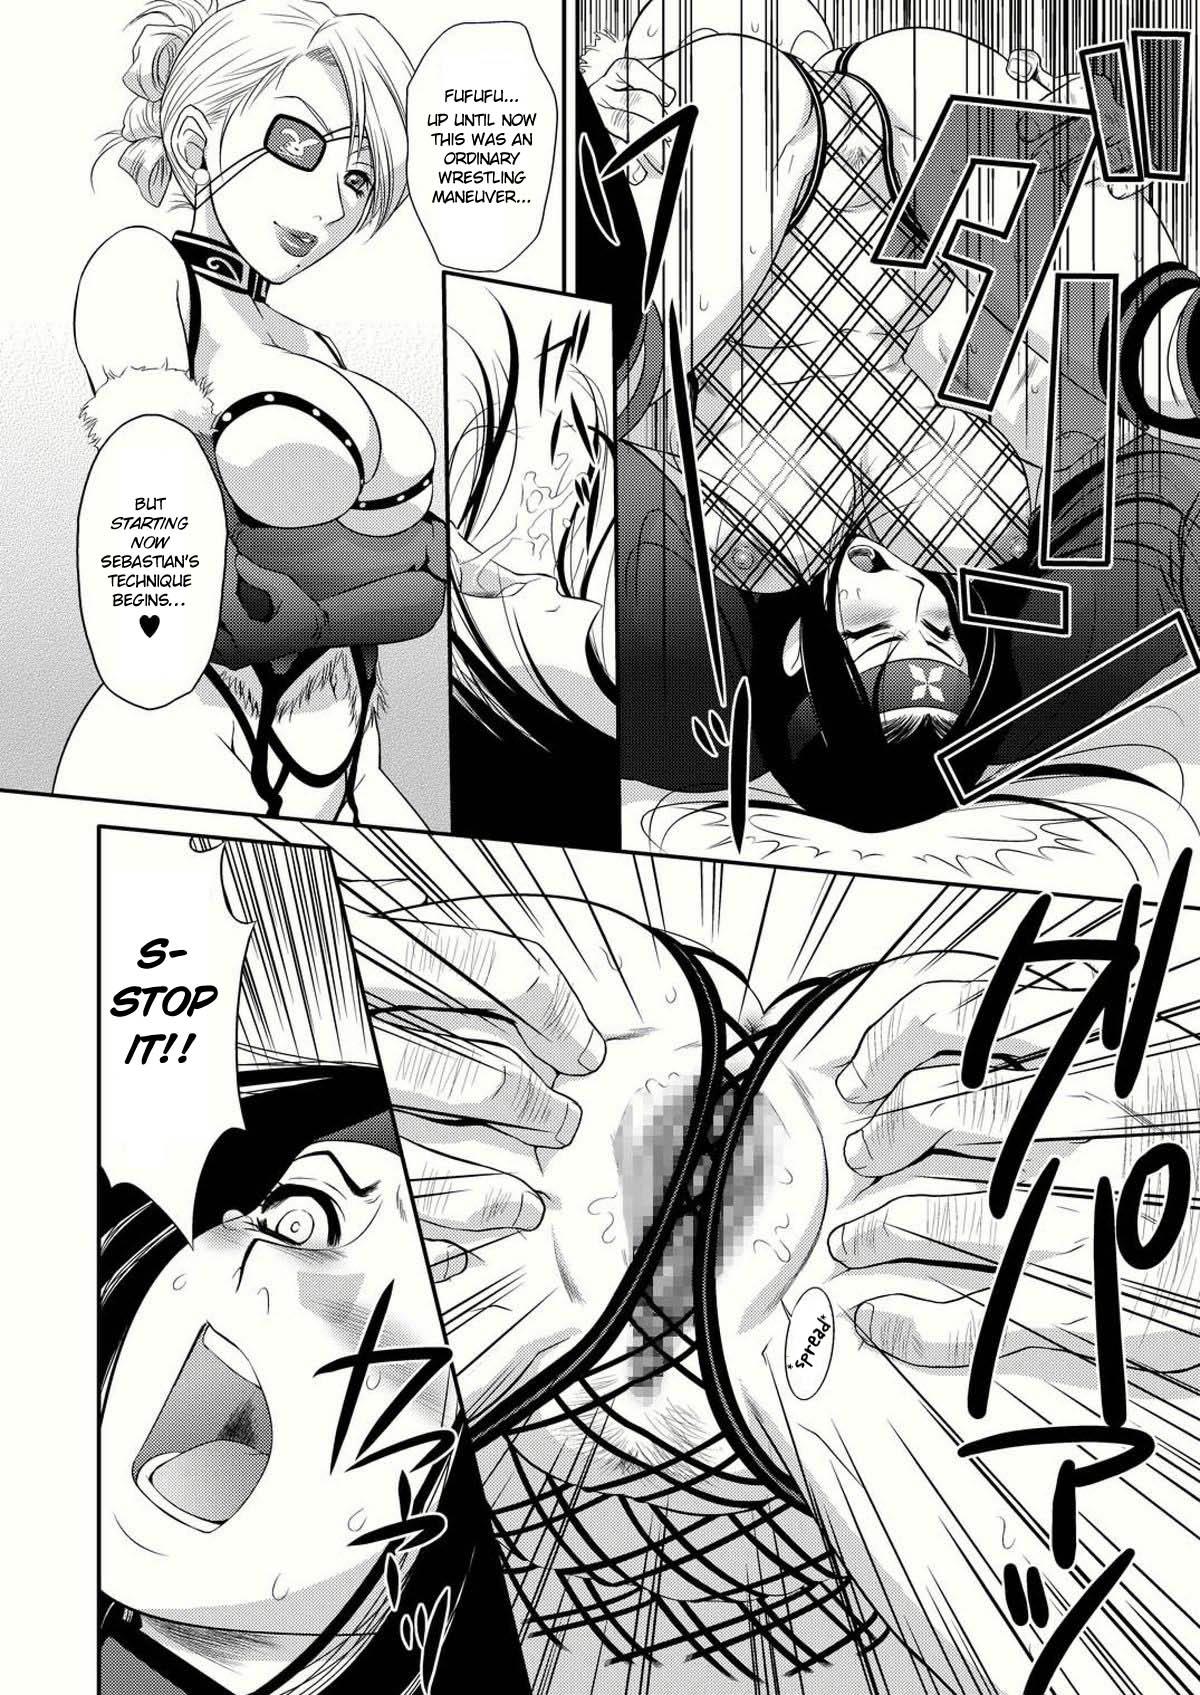 Oral Benikage Inu - Rumble roses Asshole - Page 8